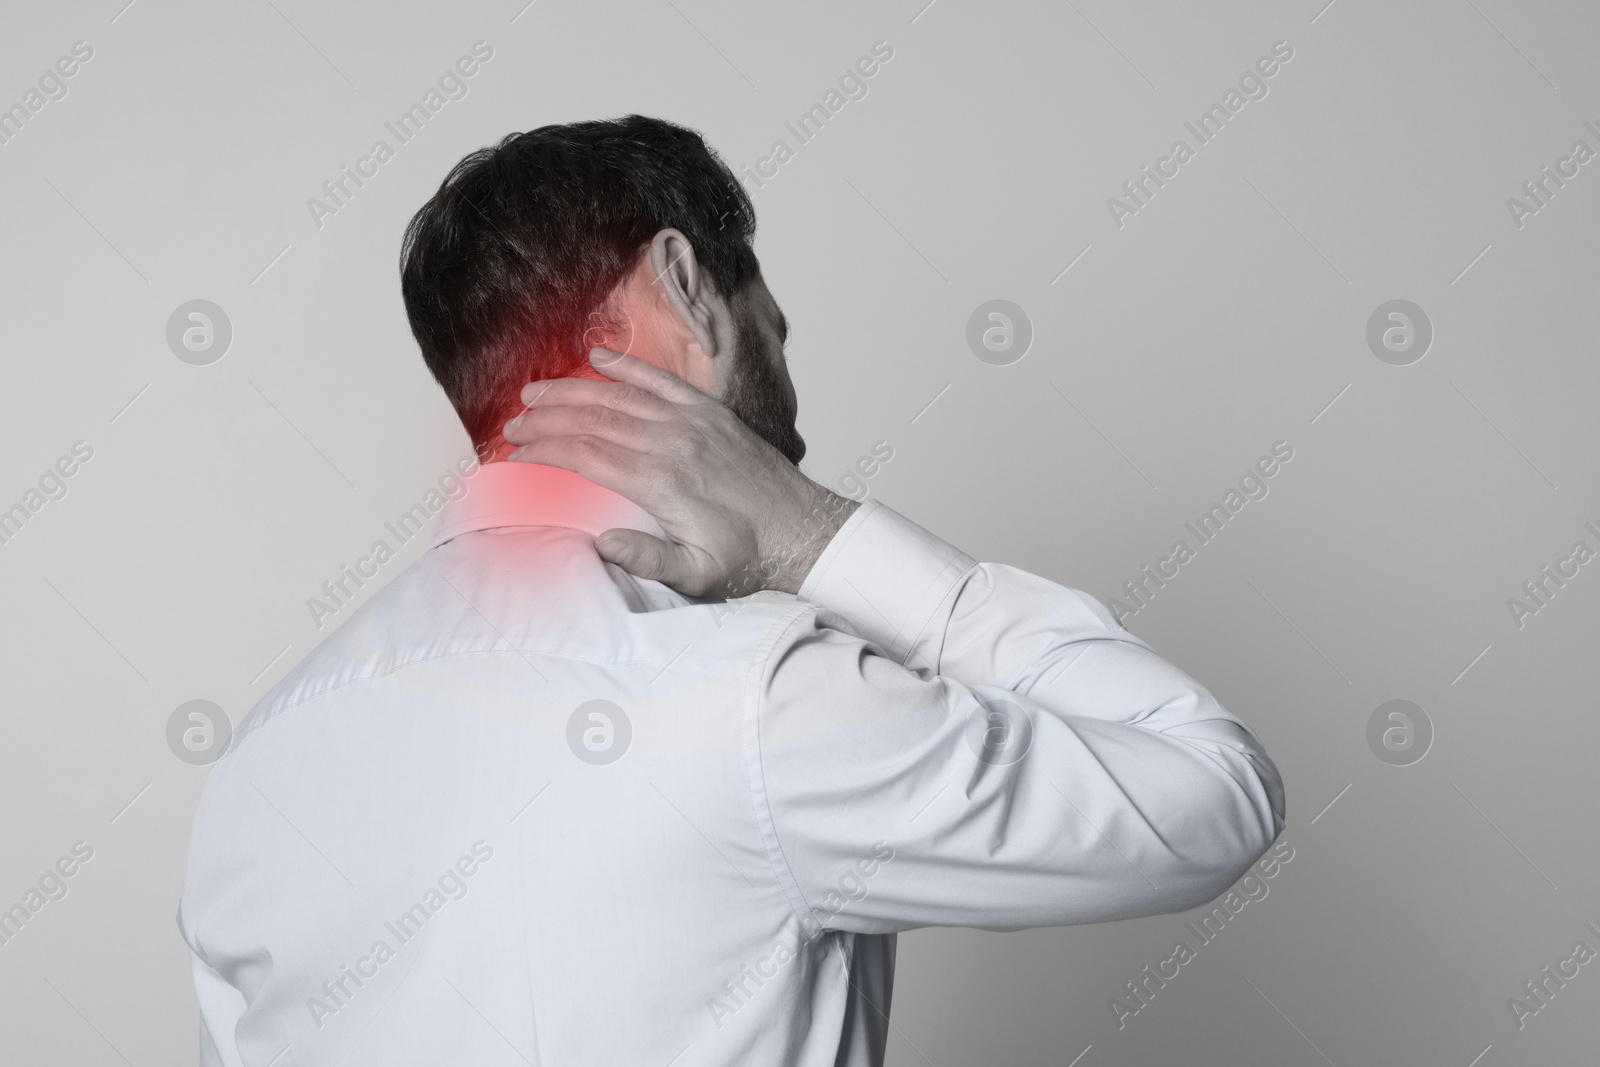 Image of Man suffering from neck pain on grey background, black and white effect